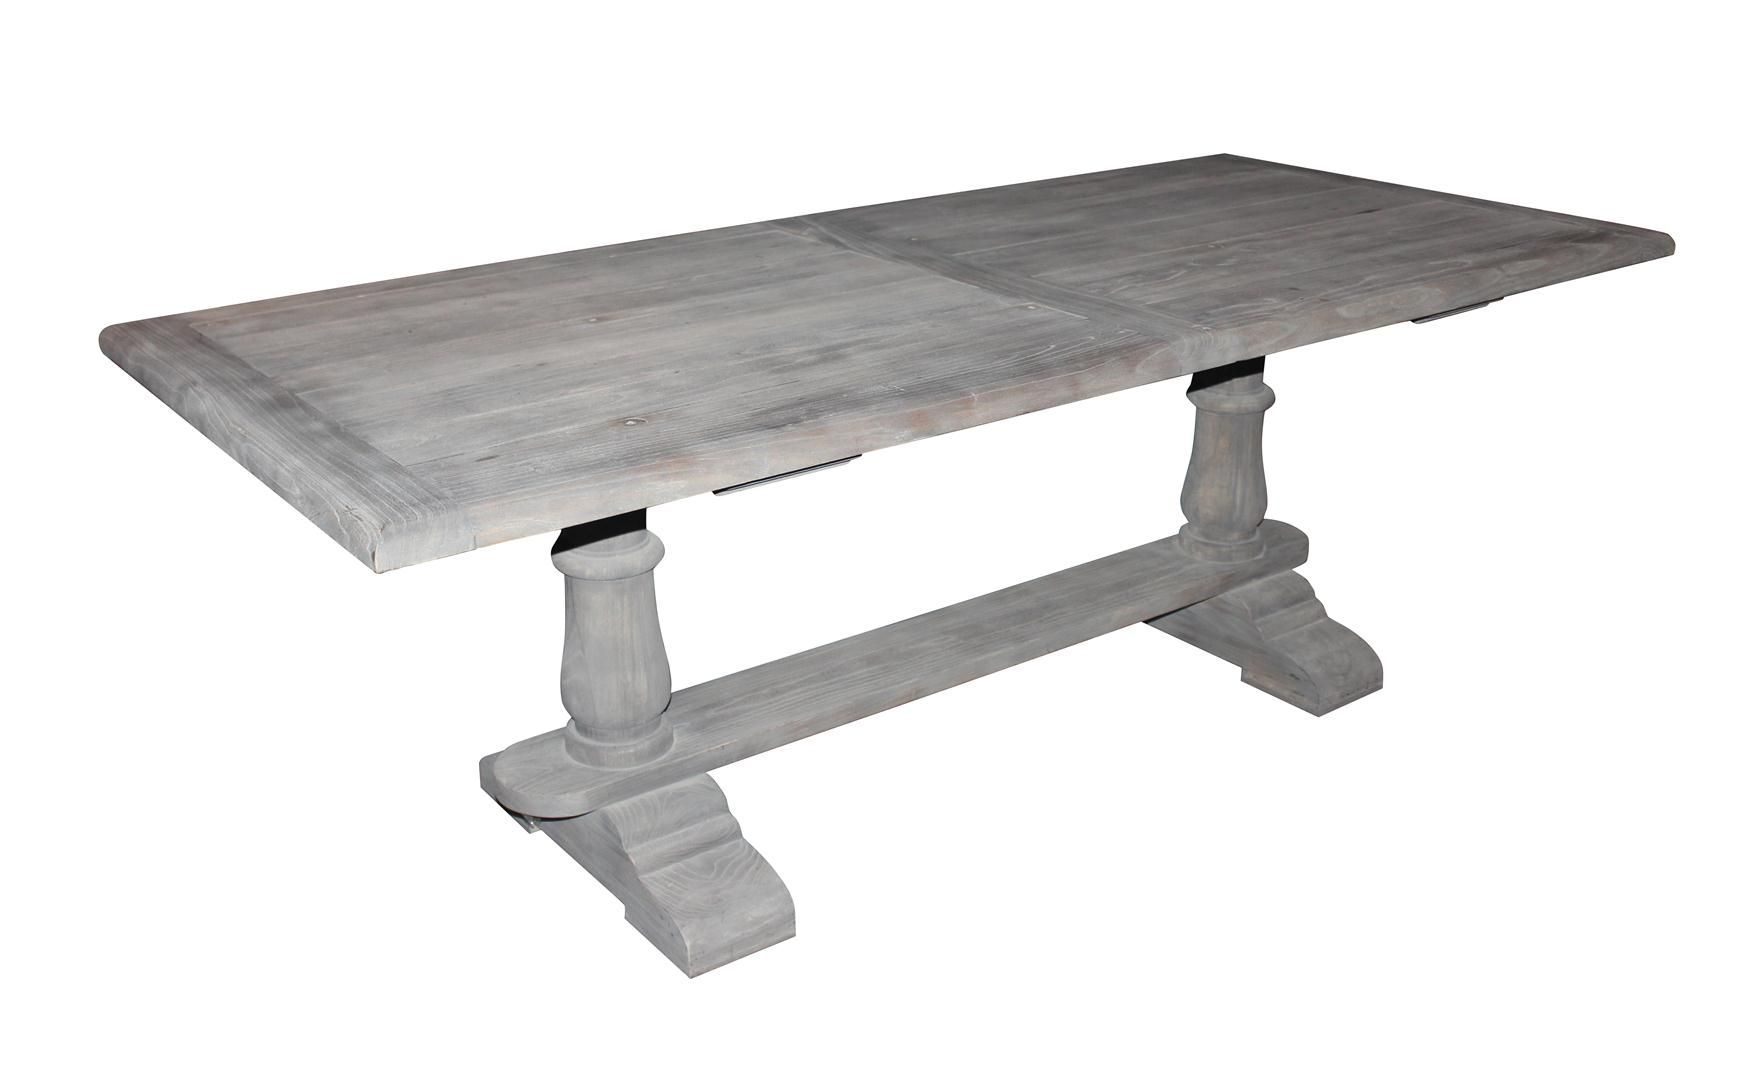 Solid Wood Dining Table With Gray Washed Out Finish | Dining Inside Recent Gray Wash Toscana Extending Dining Tables (View 2 of 25)